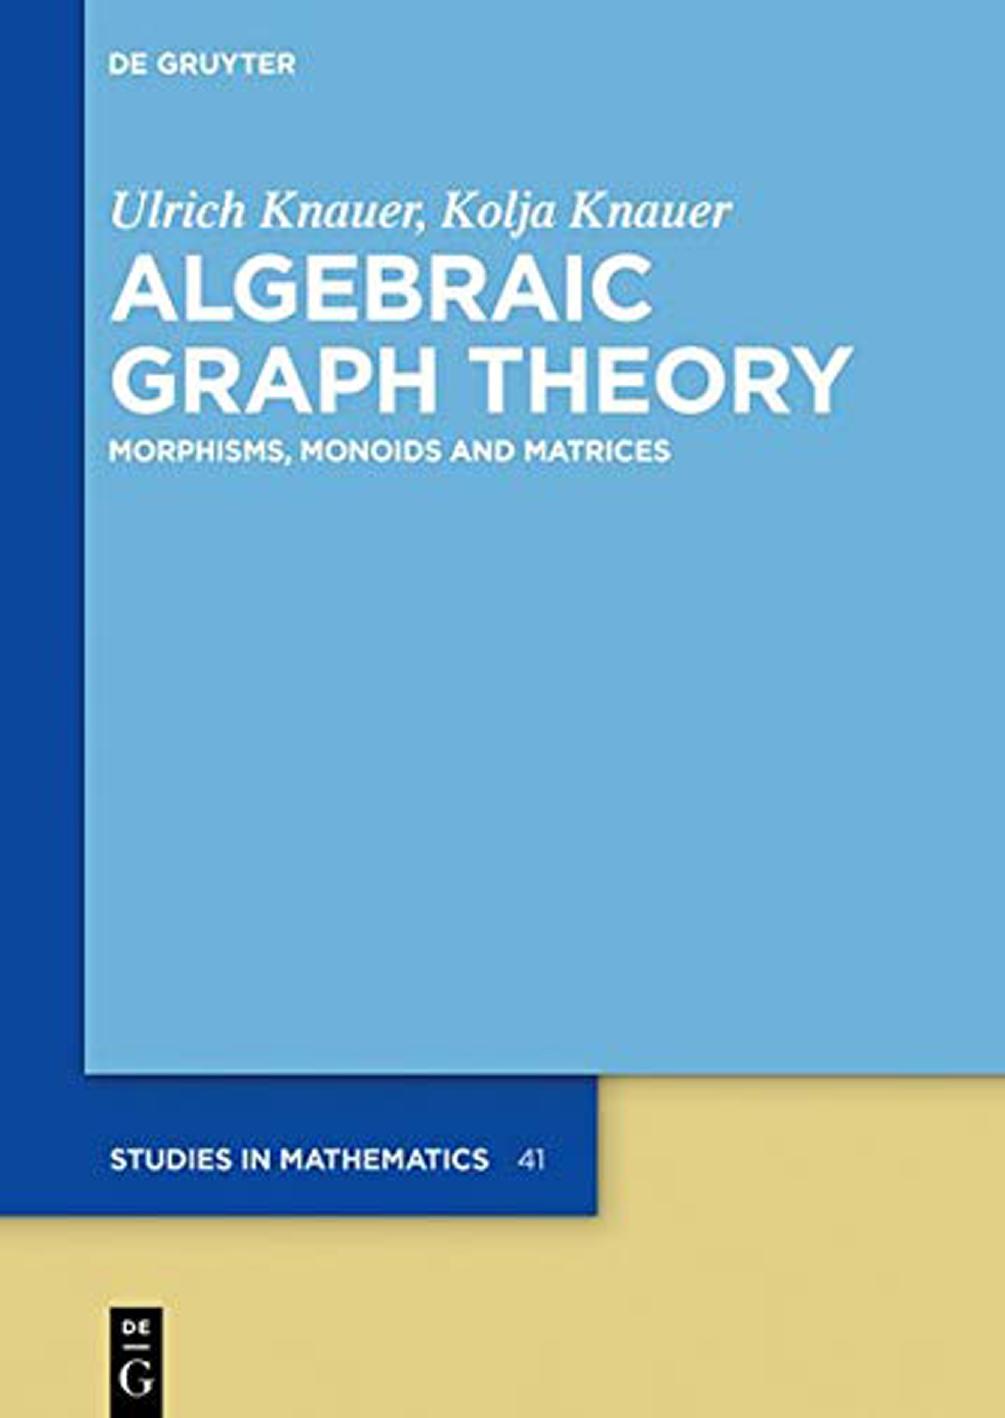 Algebraic Graph Theory: Morphisms, Monoids and Matrices